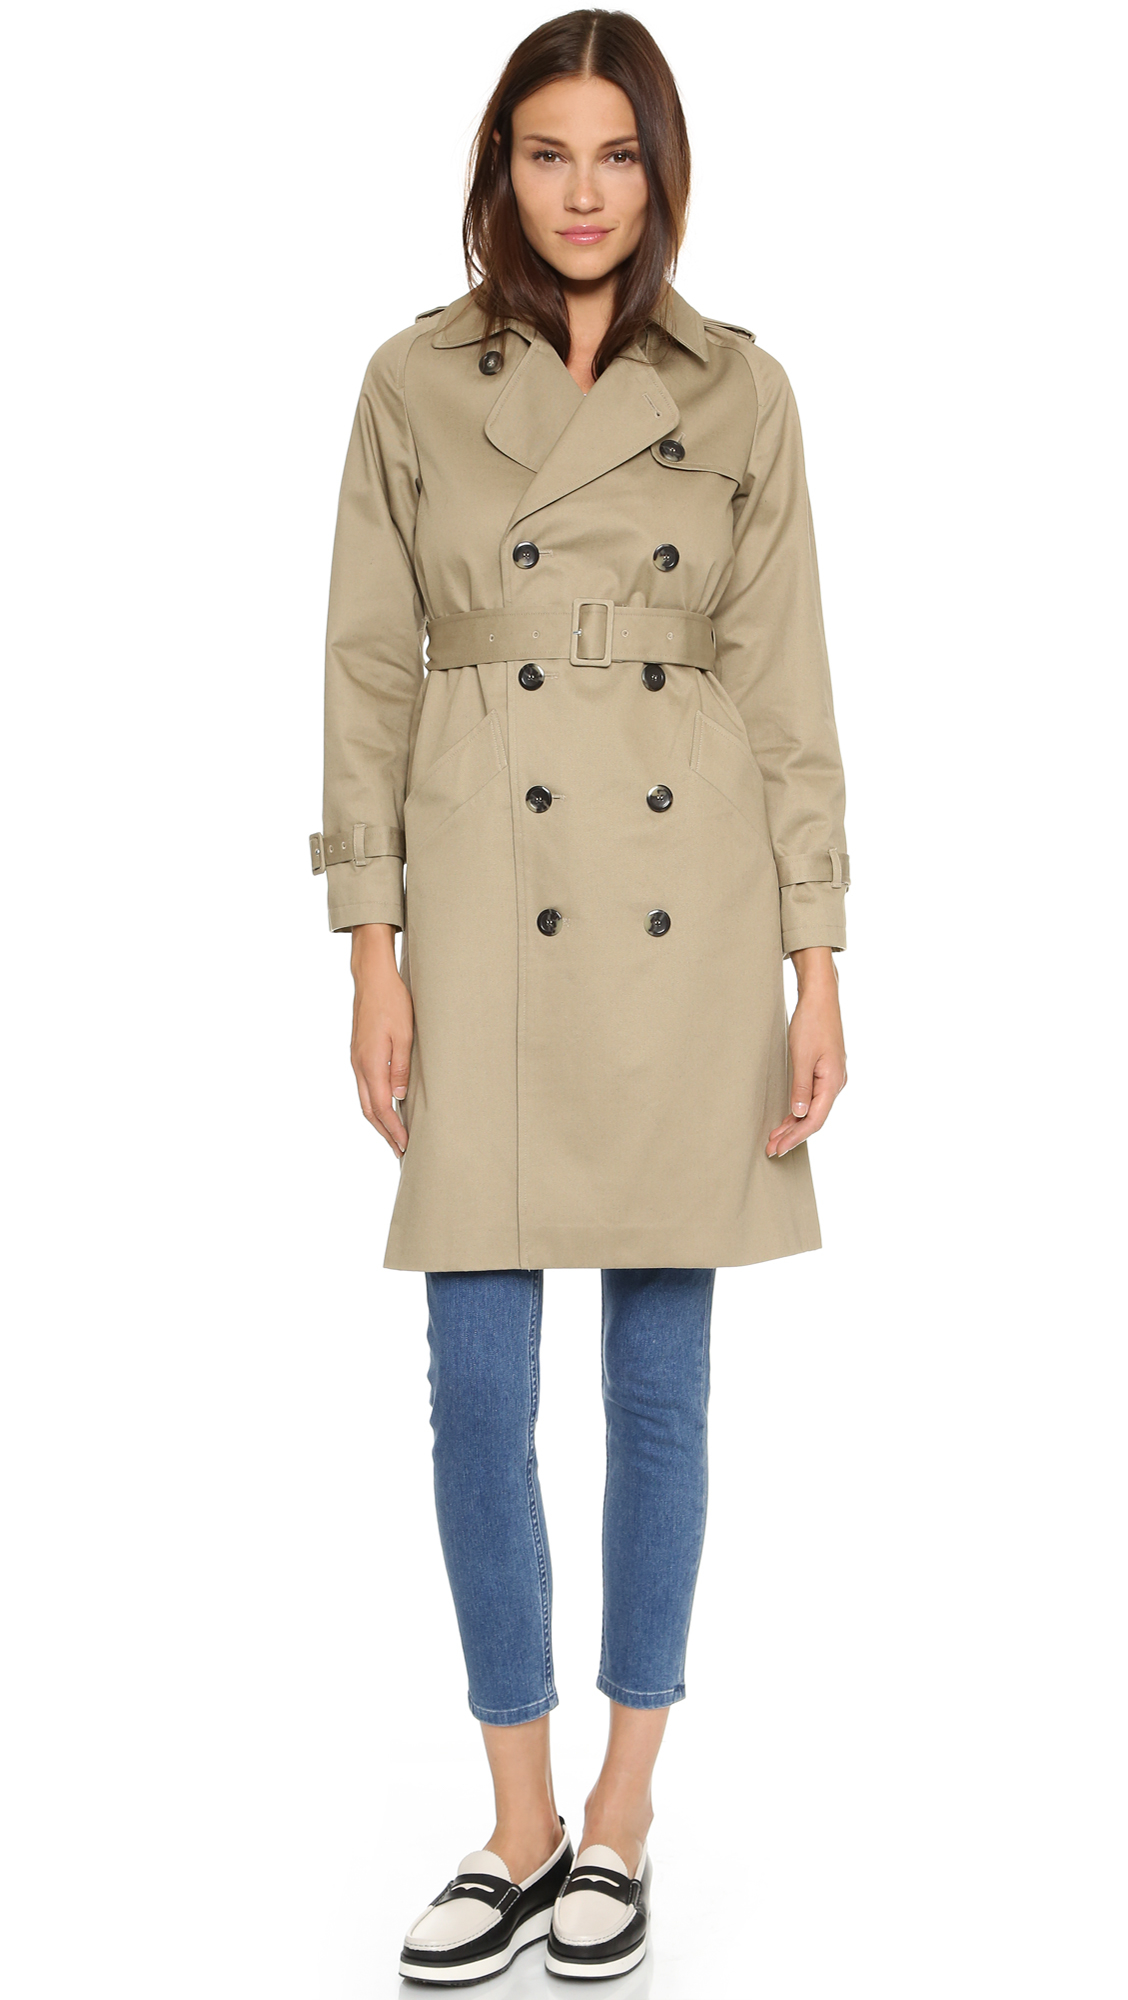 A.P.C. Vendee Trench Coat in Beige (Natural) - Lyst